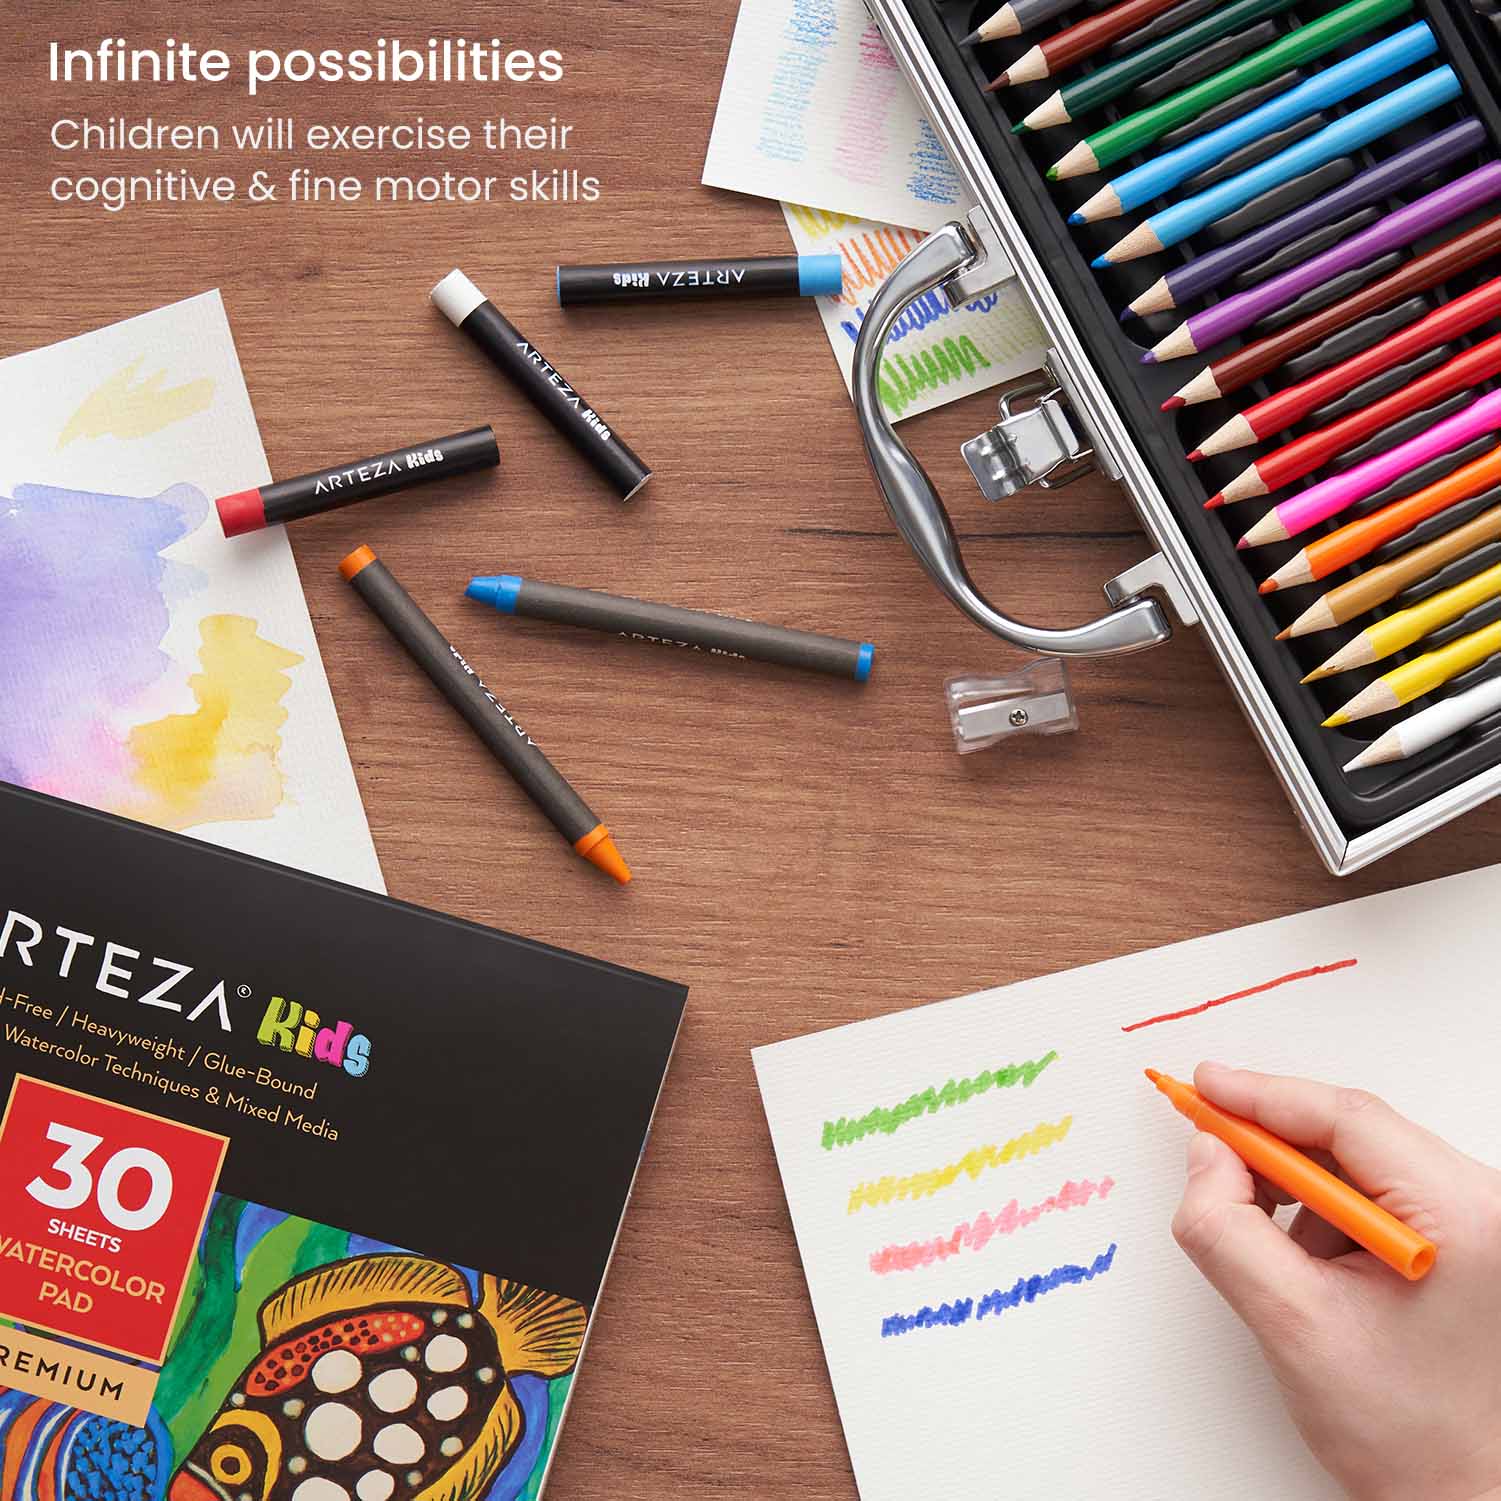 Arteza Kids Fantasy Coloring Kit, 3 Canvas Panels, 4 x 4 in, 10 Markers, 16 Watercolor Pencils, 1 Paint Brush, 1 Sharpener, Kids Activities for Ages